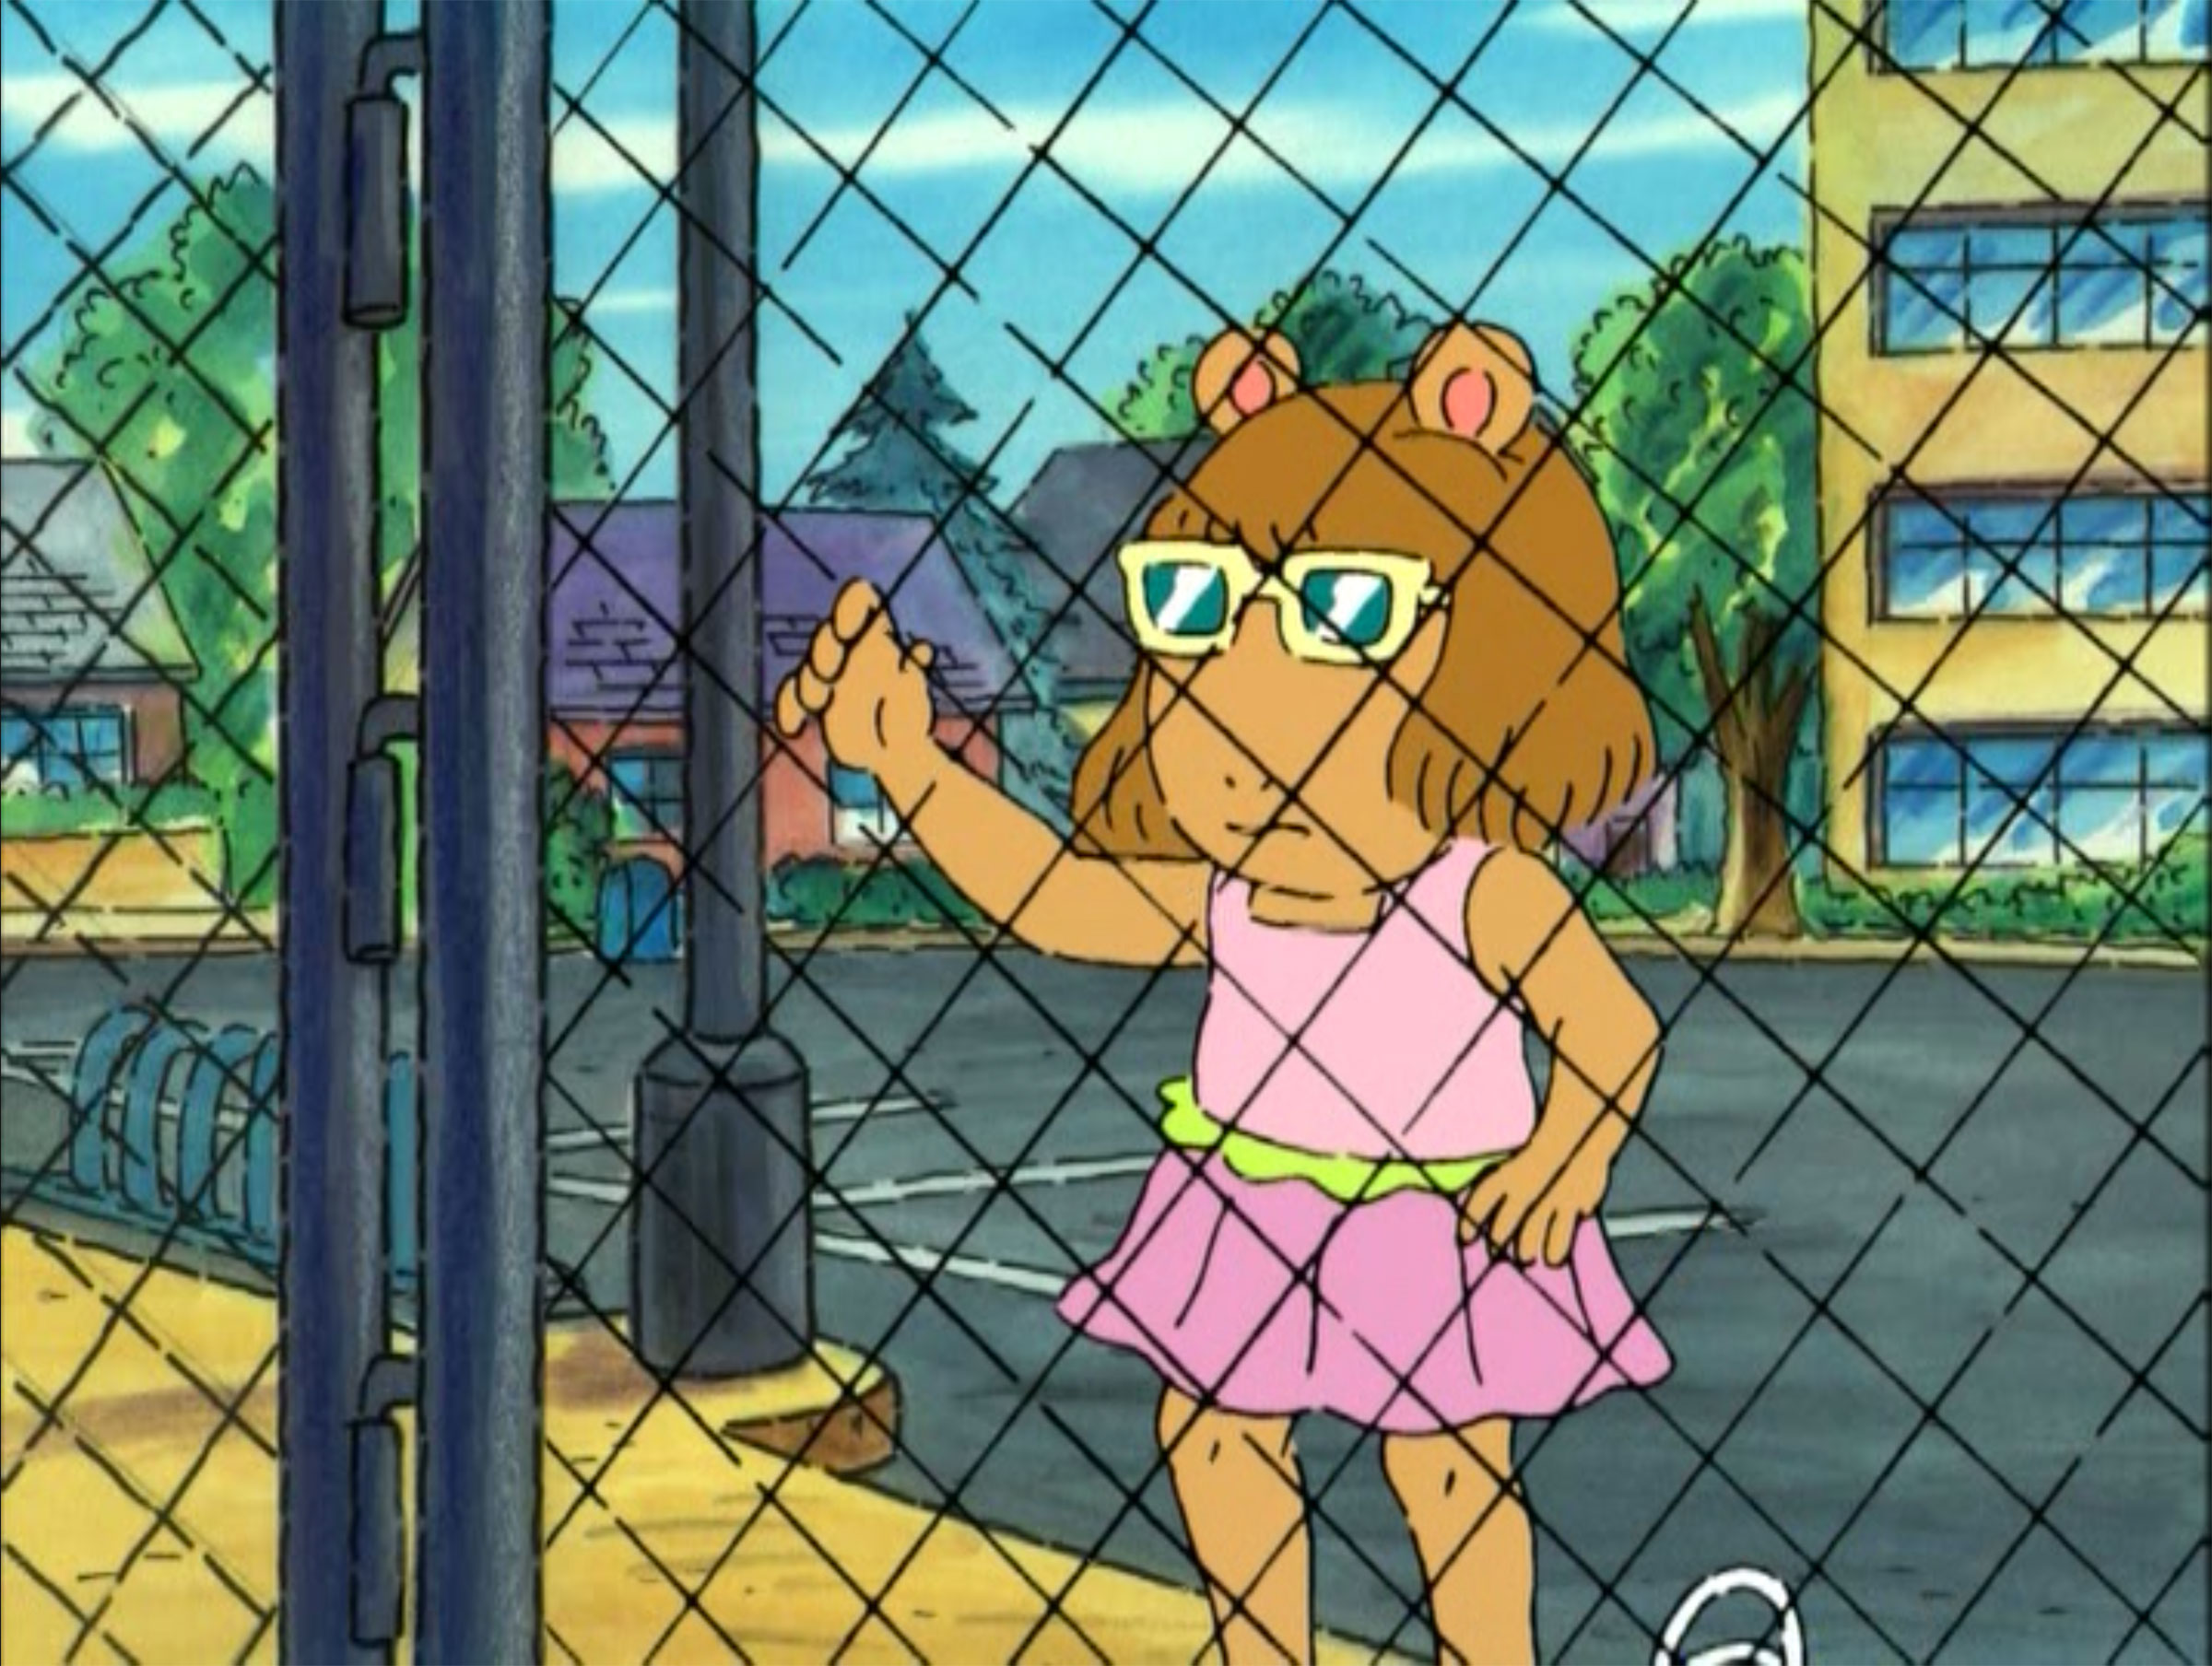 A still image of the character D.W. standing at a fence in the PBS show 'Arthur'